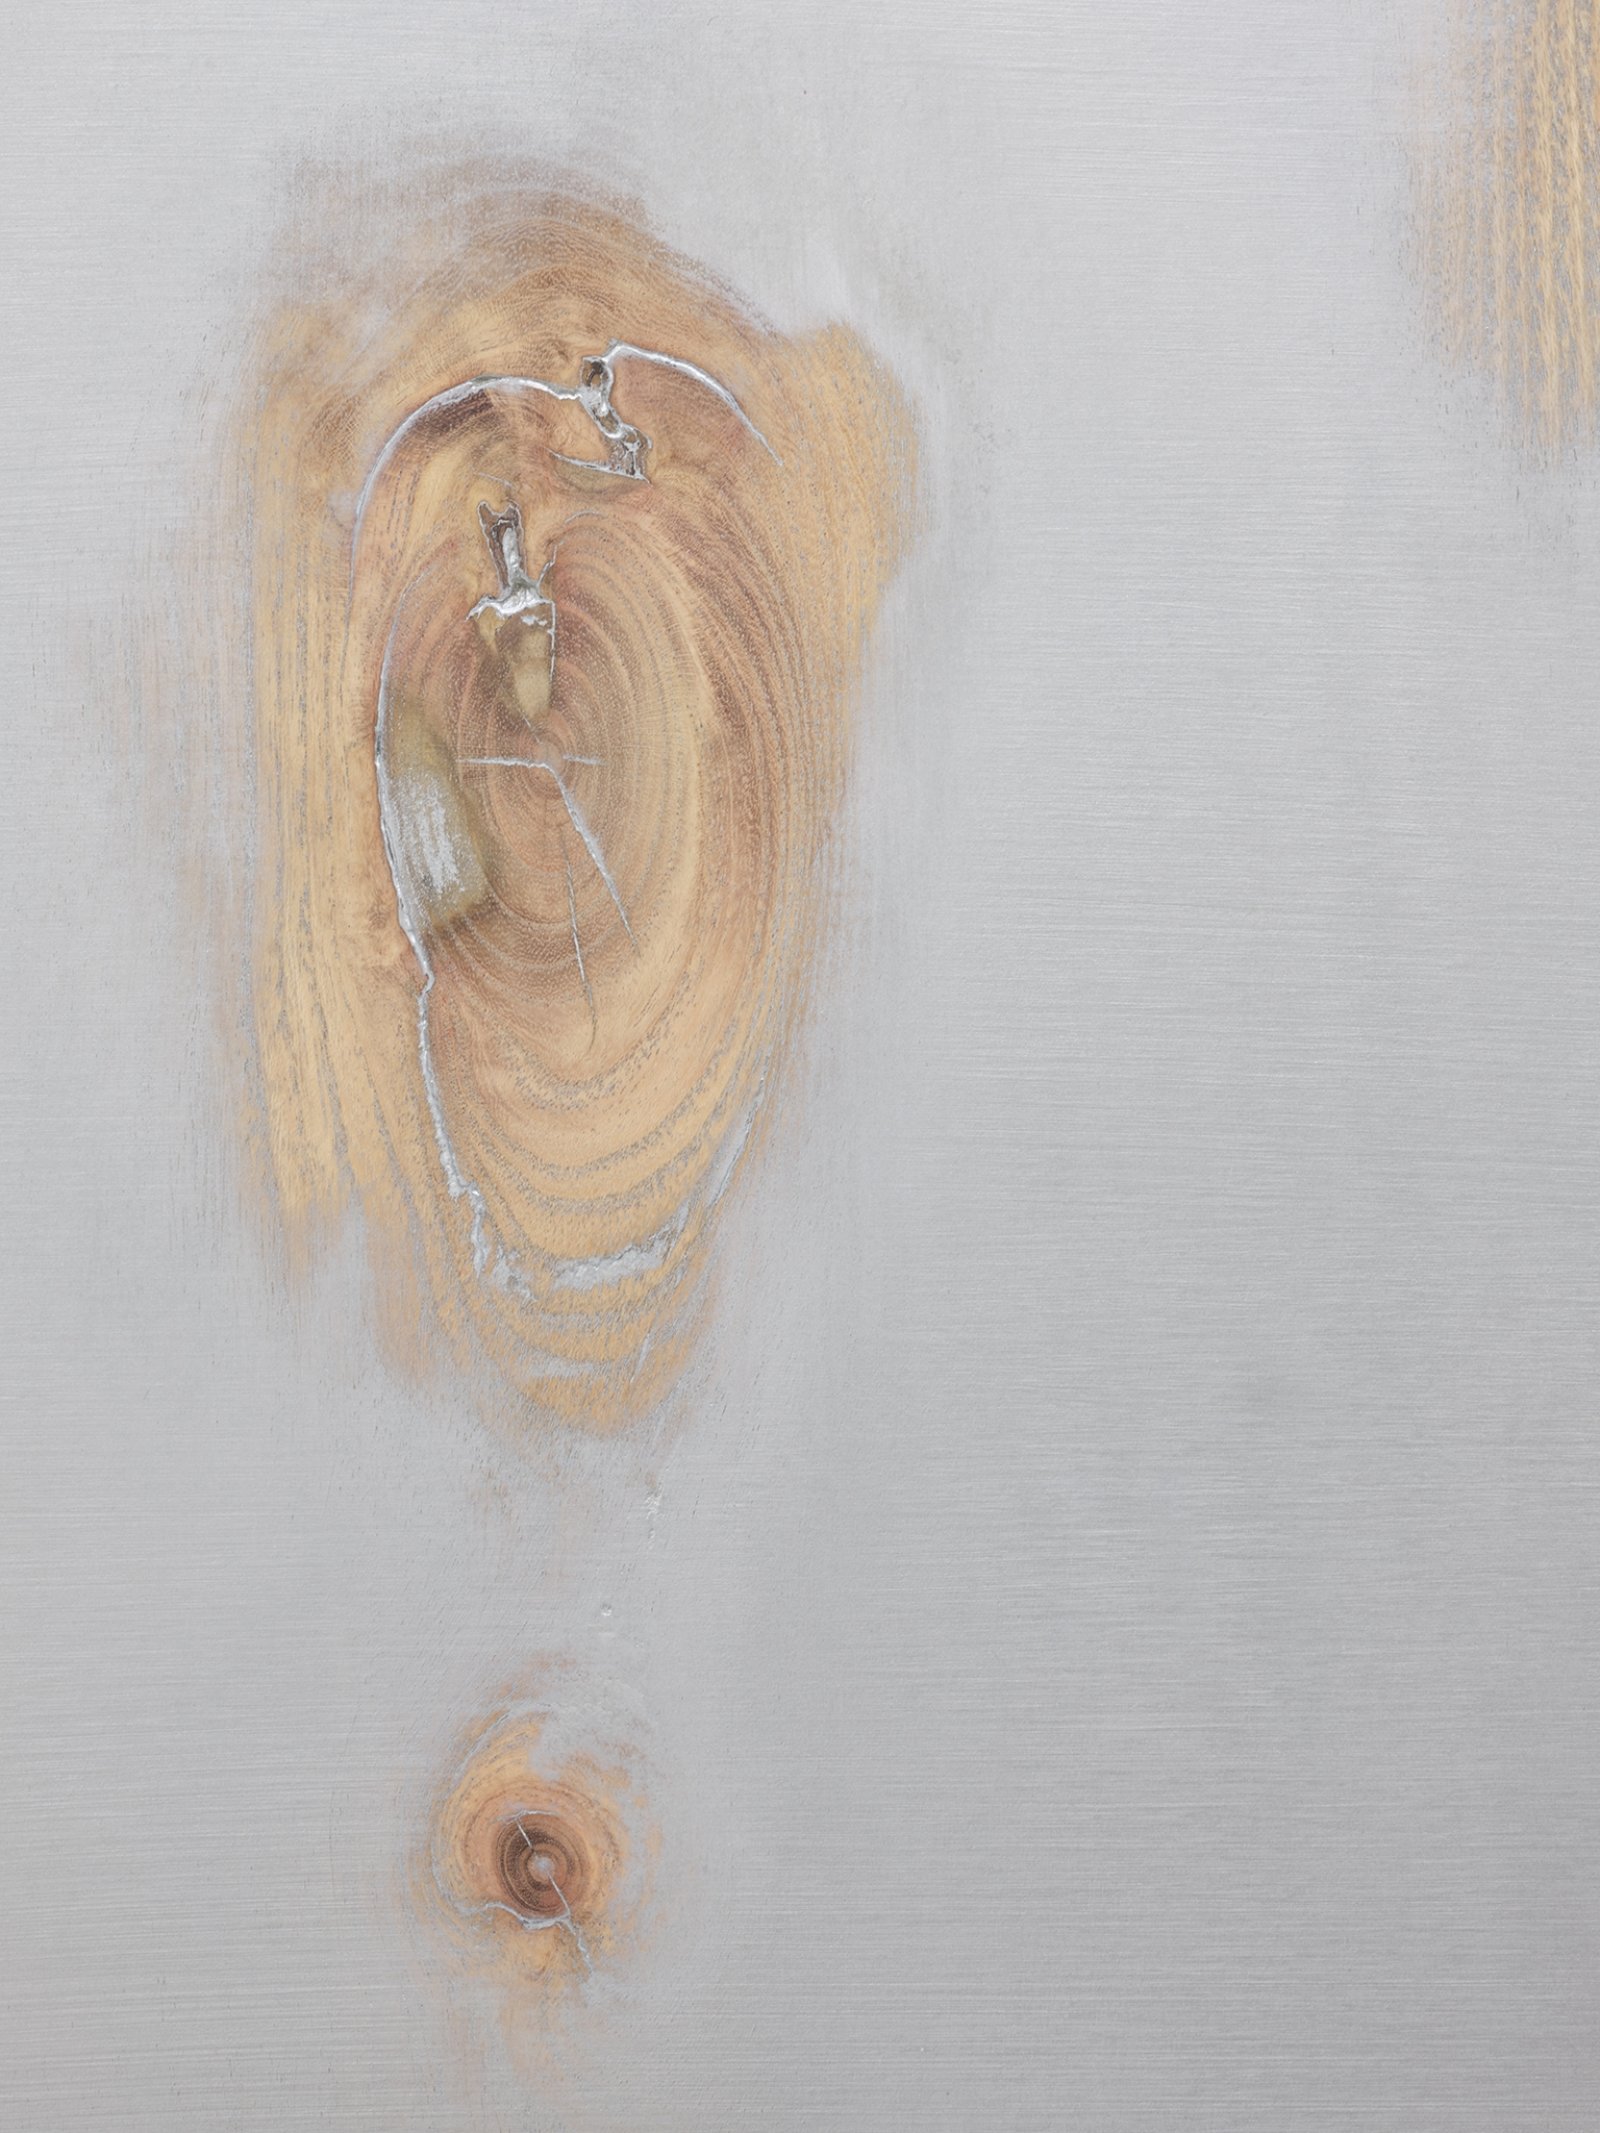 Ashes Withyman, Traceless, no more need to hide (now the old mirror reflects everything) (detail), 2020, basswood wood, honey locust wood, paint, 30 x 23 in. (76 x 57 cm)